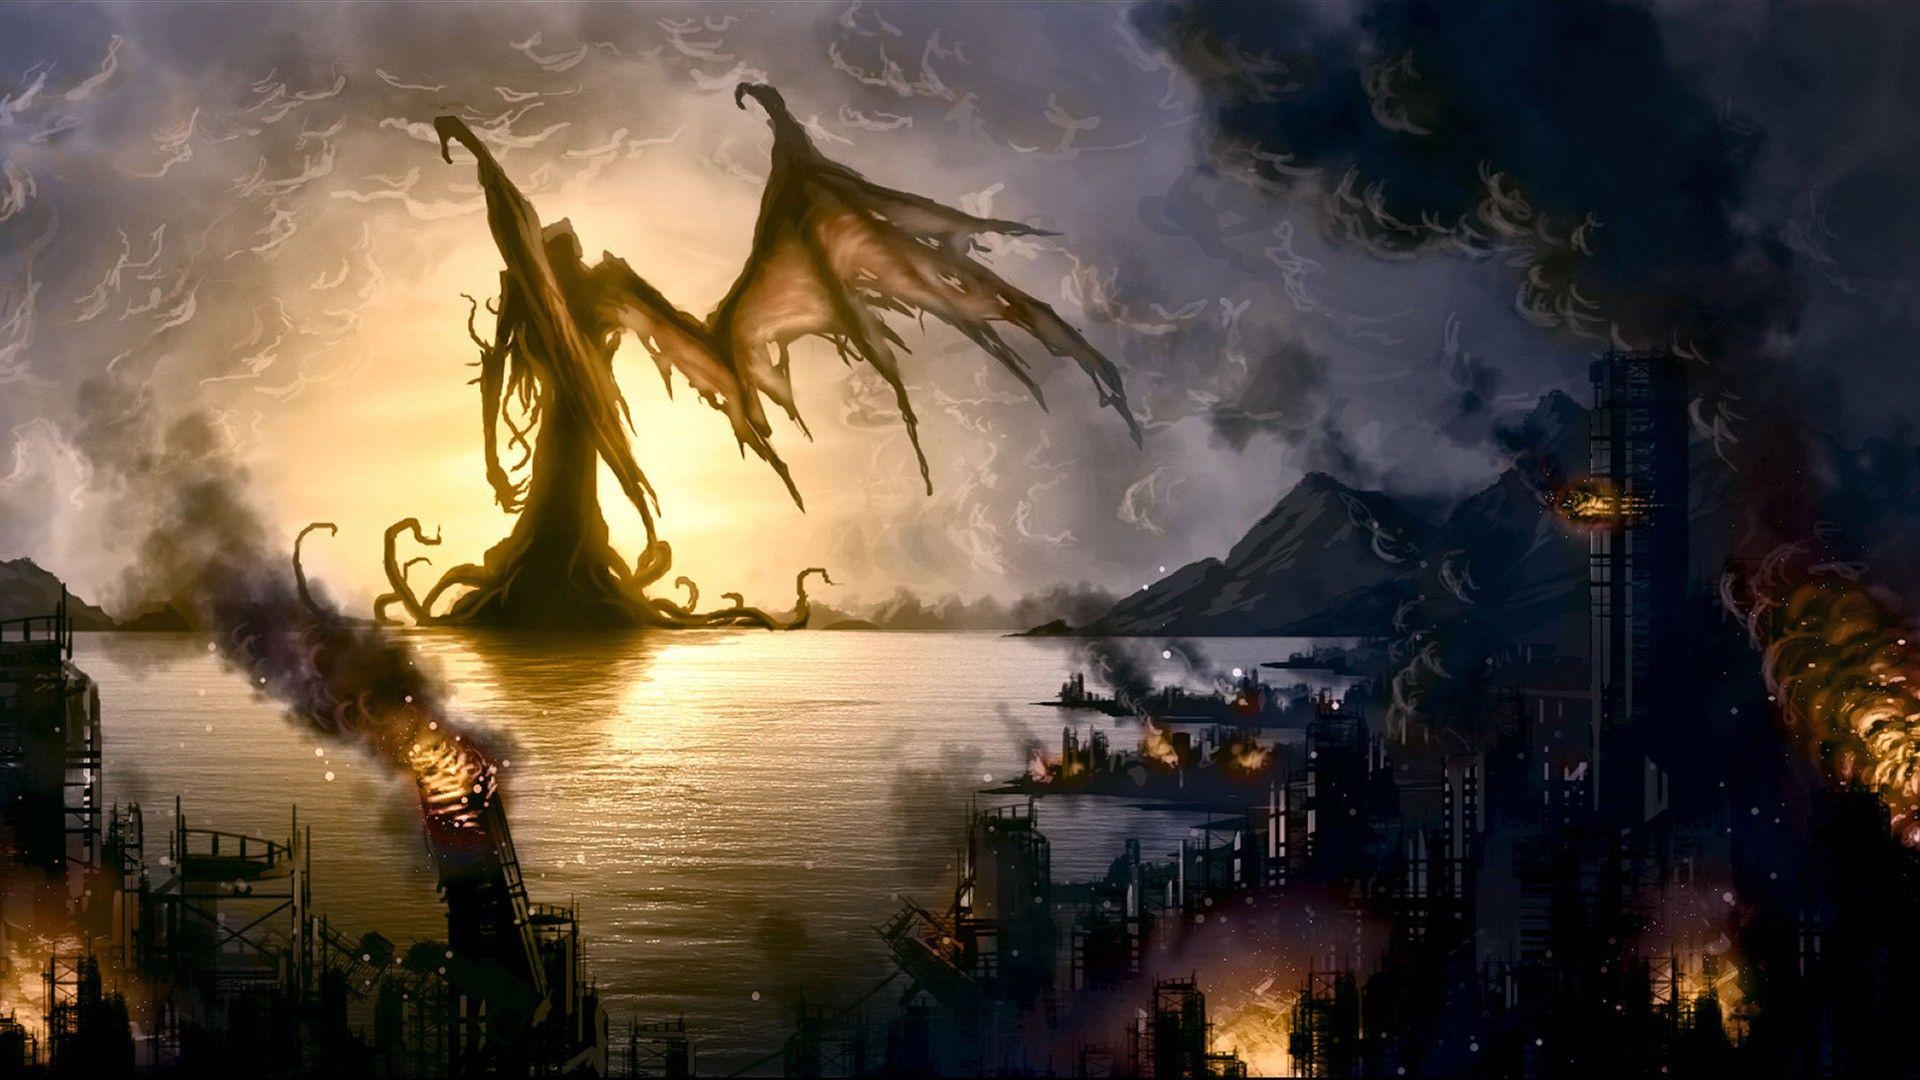 Cthulhu Full HD Wallpaper and Background Imagex1080